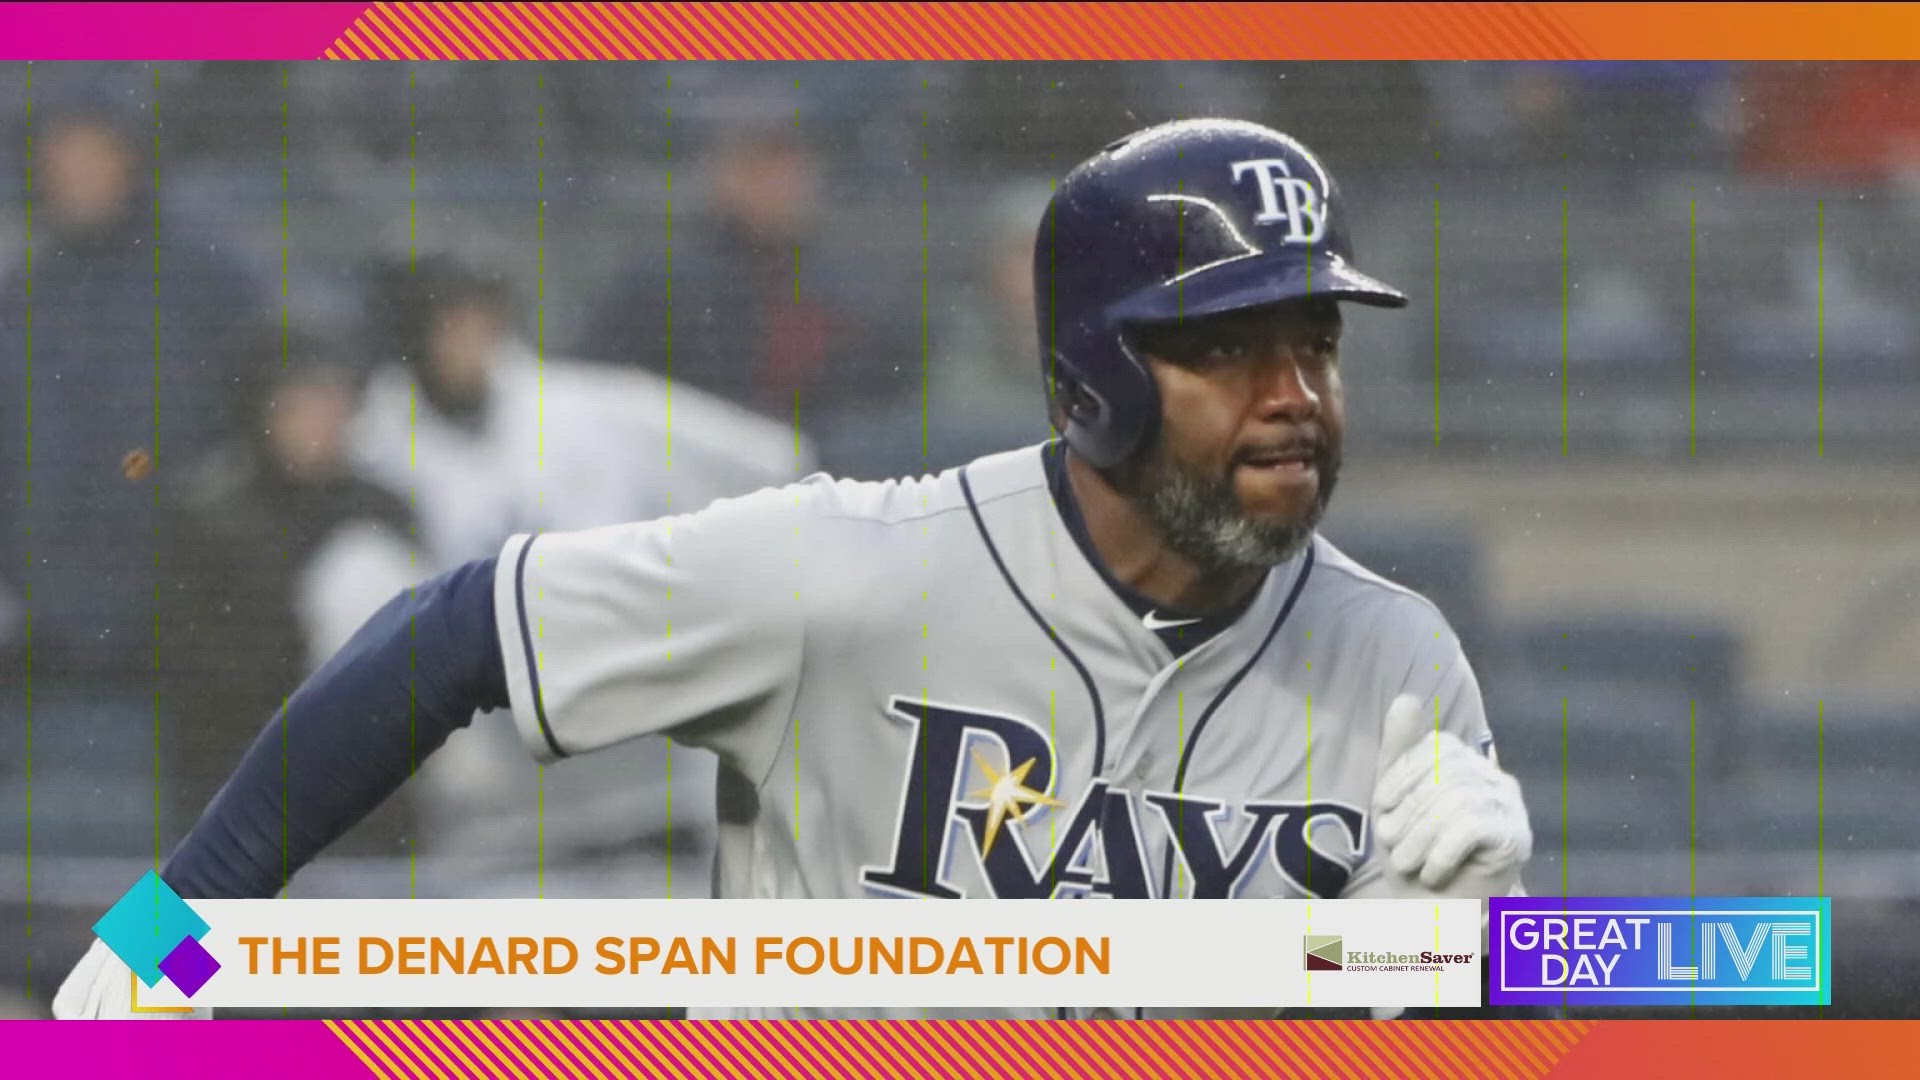 Tampa's own Denard Span hosts fundraiser dinner at Tropicana Field to benefit single parents on Sept. 28th. For tickets visit www.DenardFoundation.org